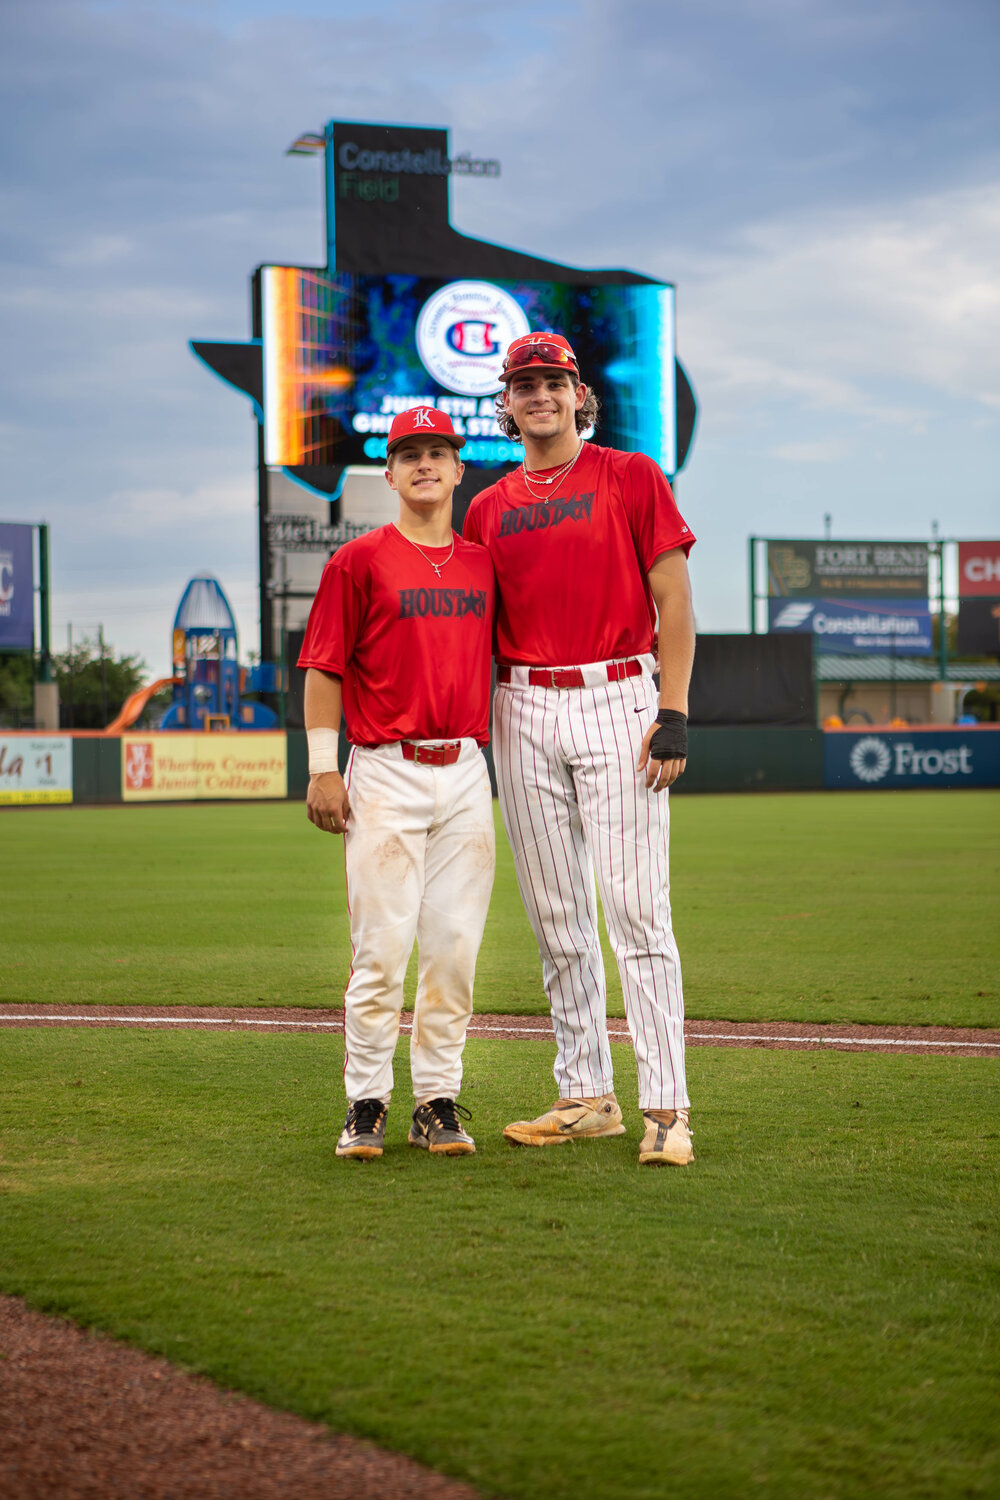 Cole Kaase and Brady Englett pose for a photo together after Tuesday's GHBCA Seniors All-Star game at Constellation Field in Sugar Land.